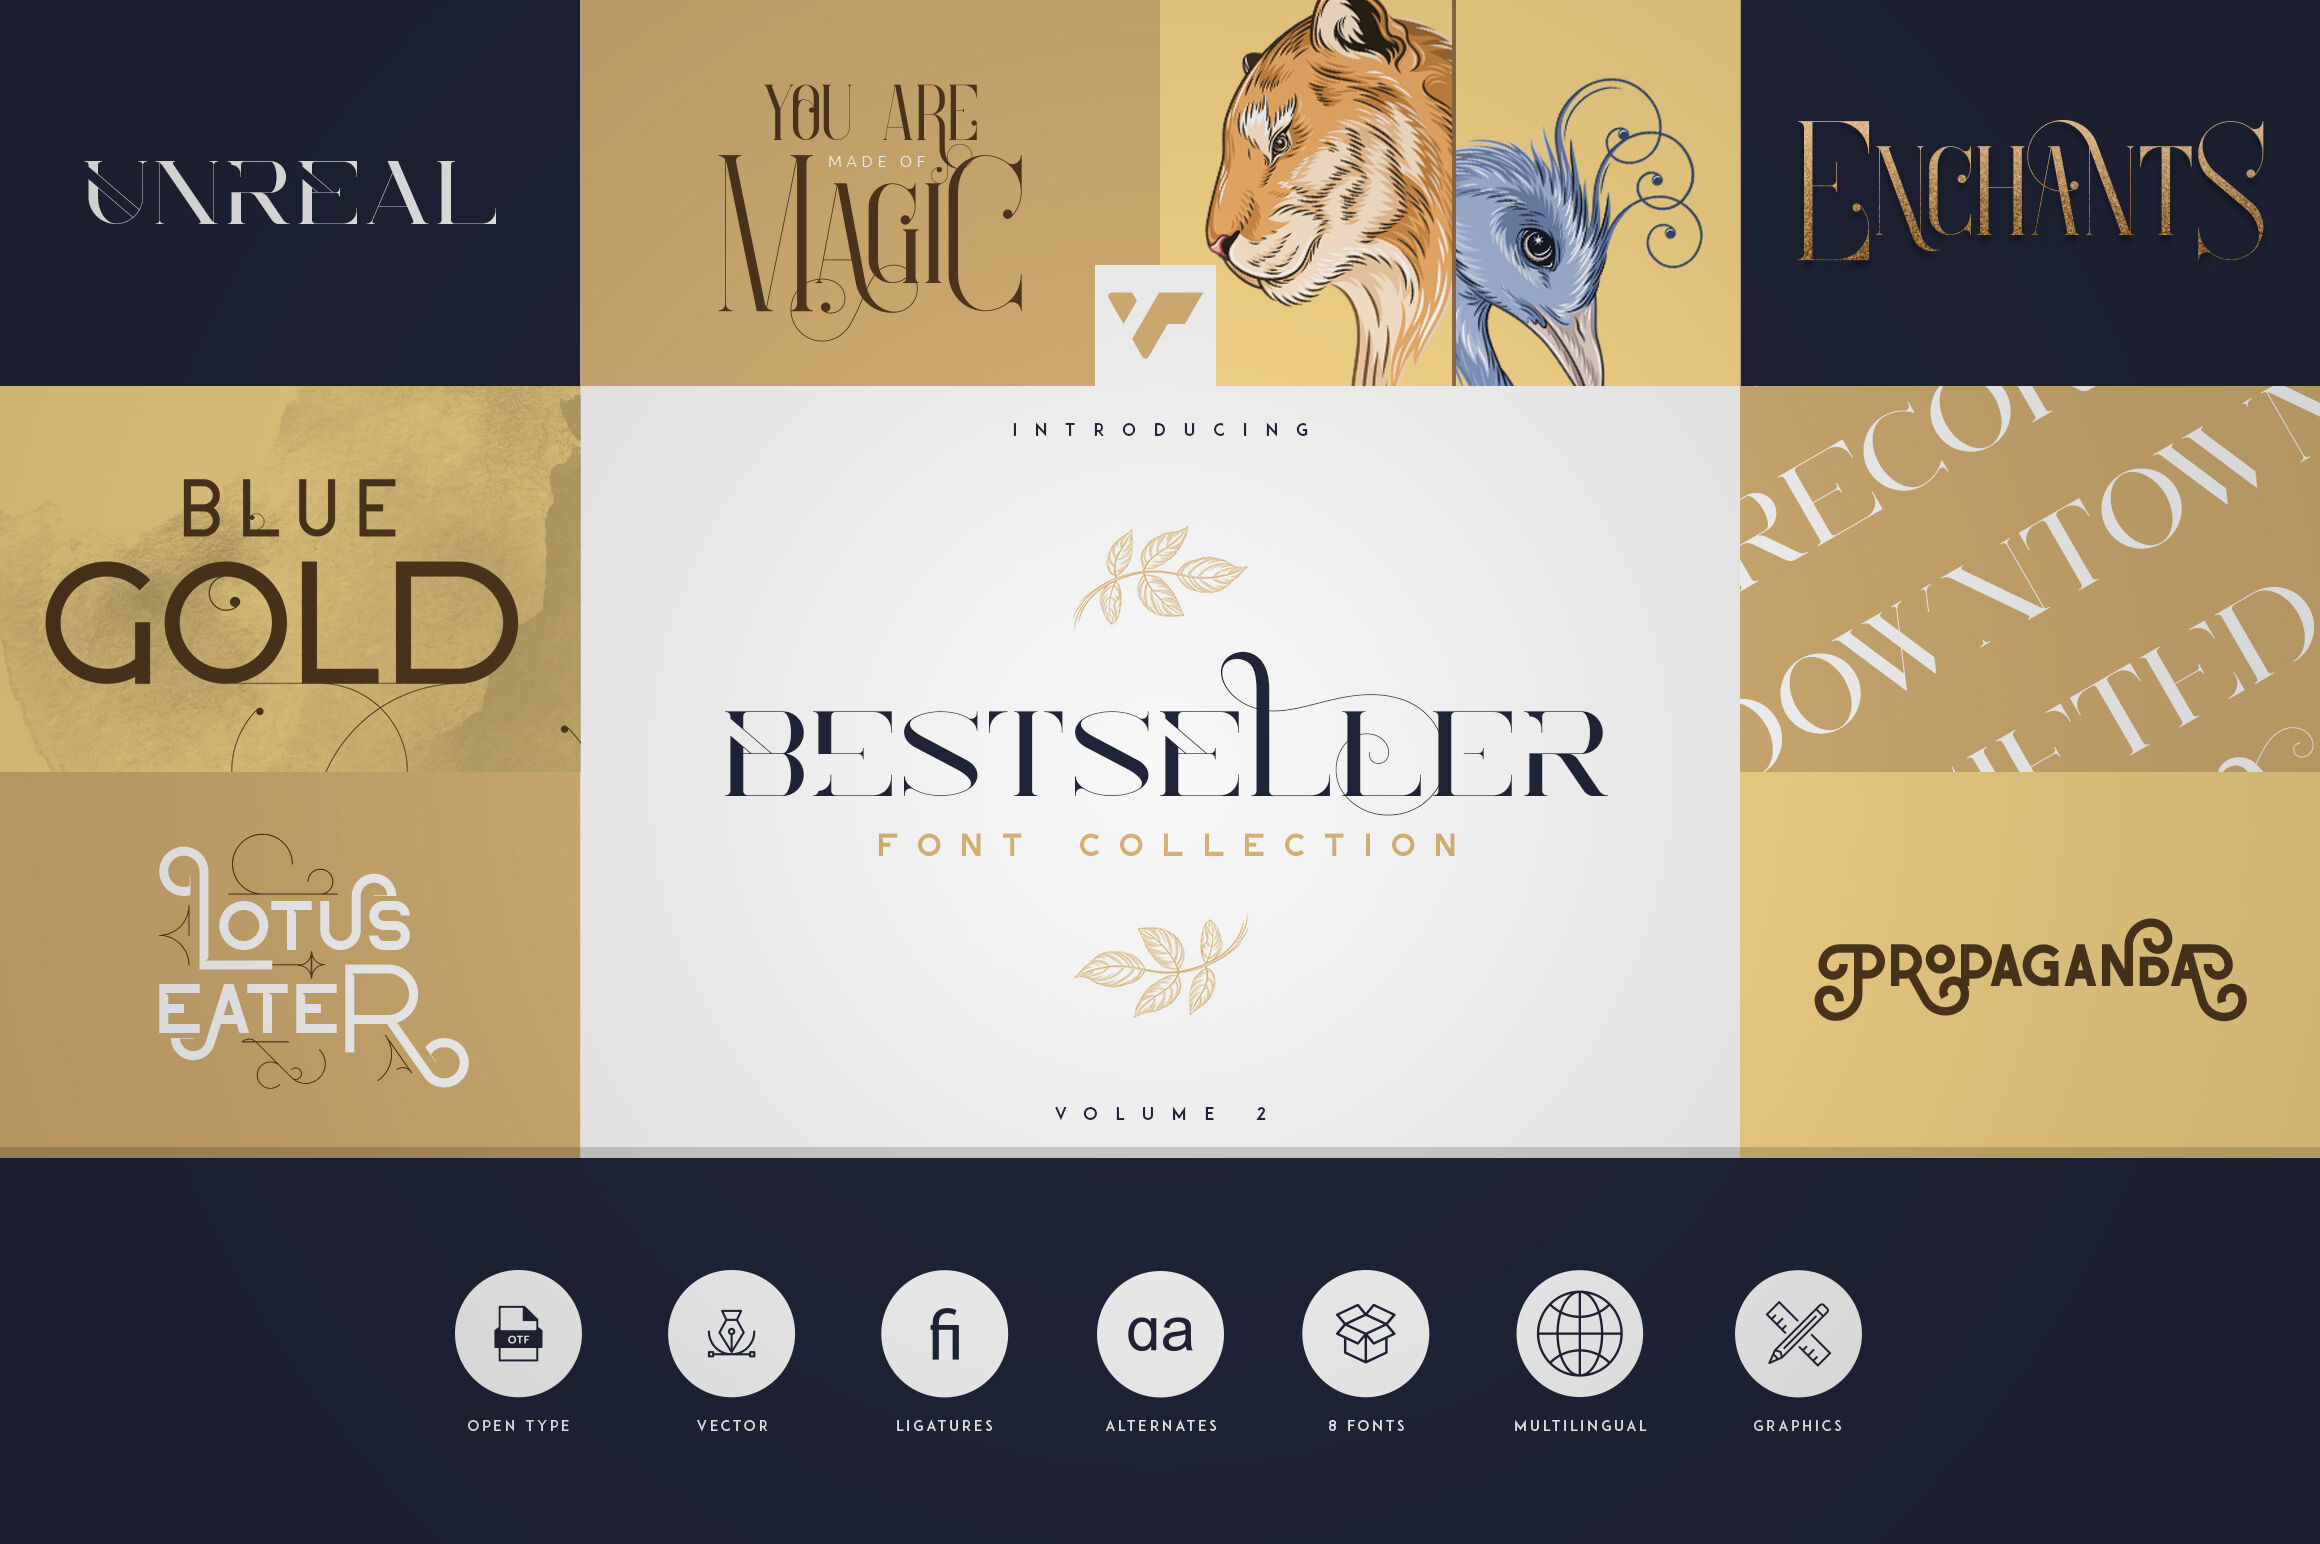 Bestseller Font Collection Vol 02 By Vpcreativeshop Thehungryjpeg Com